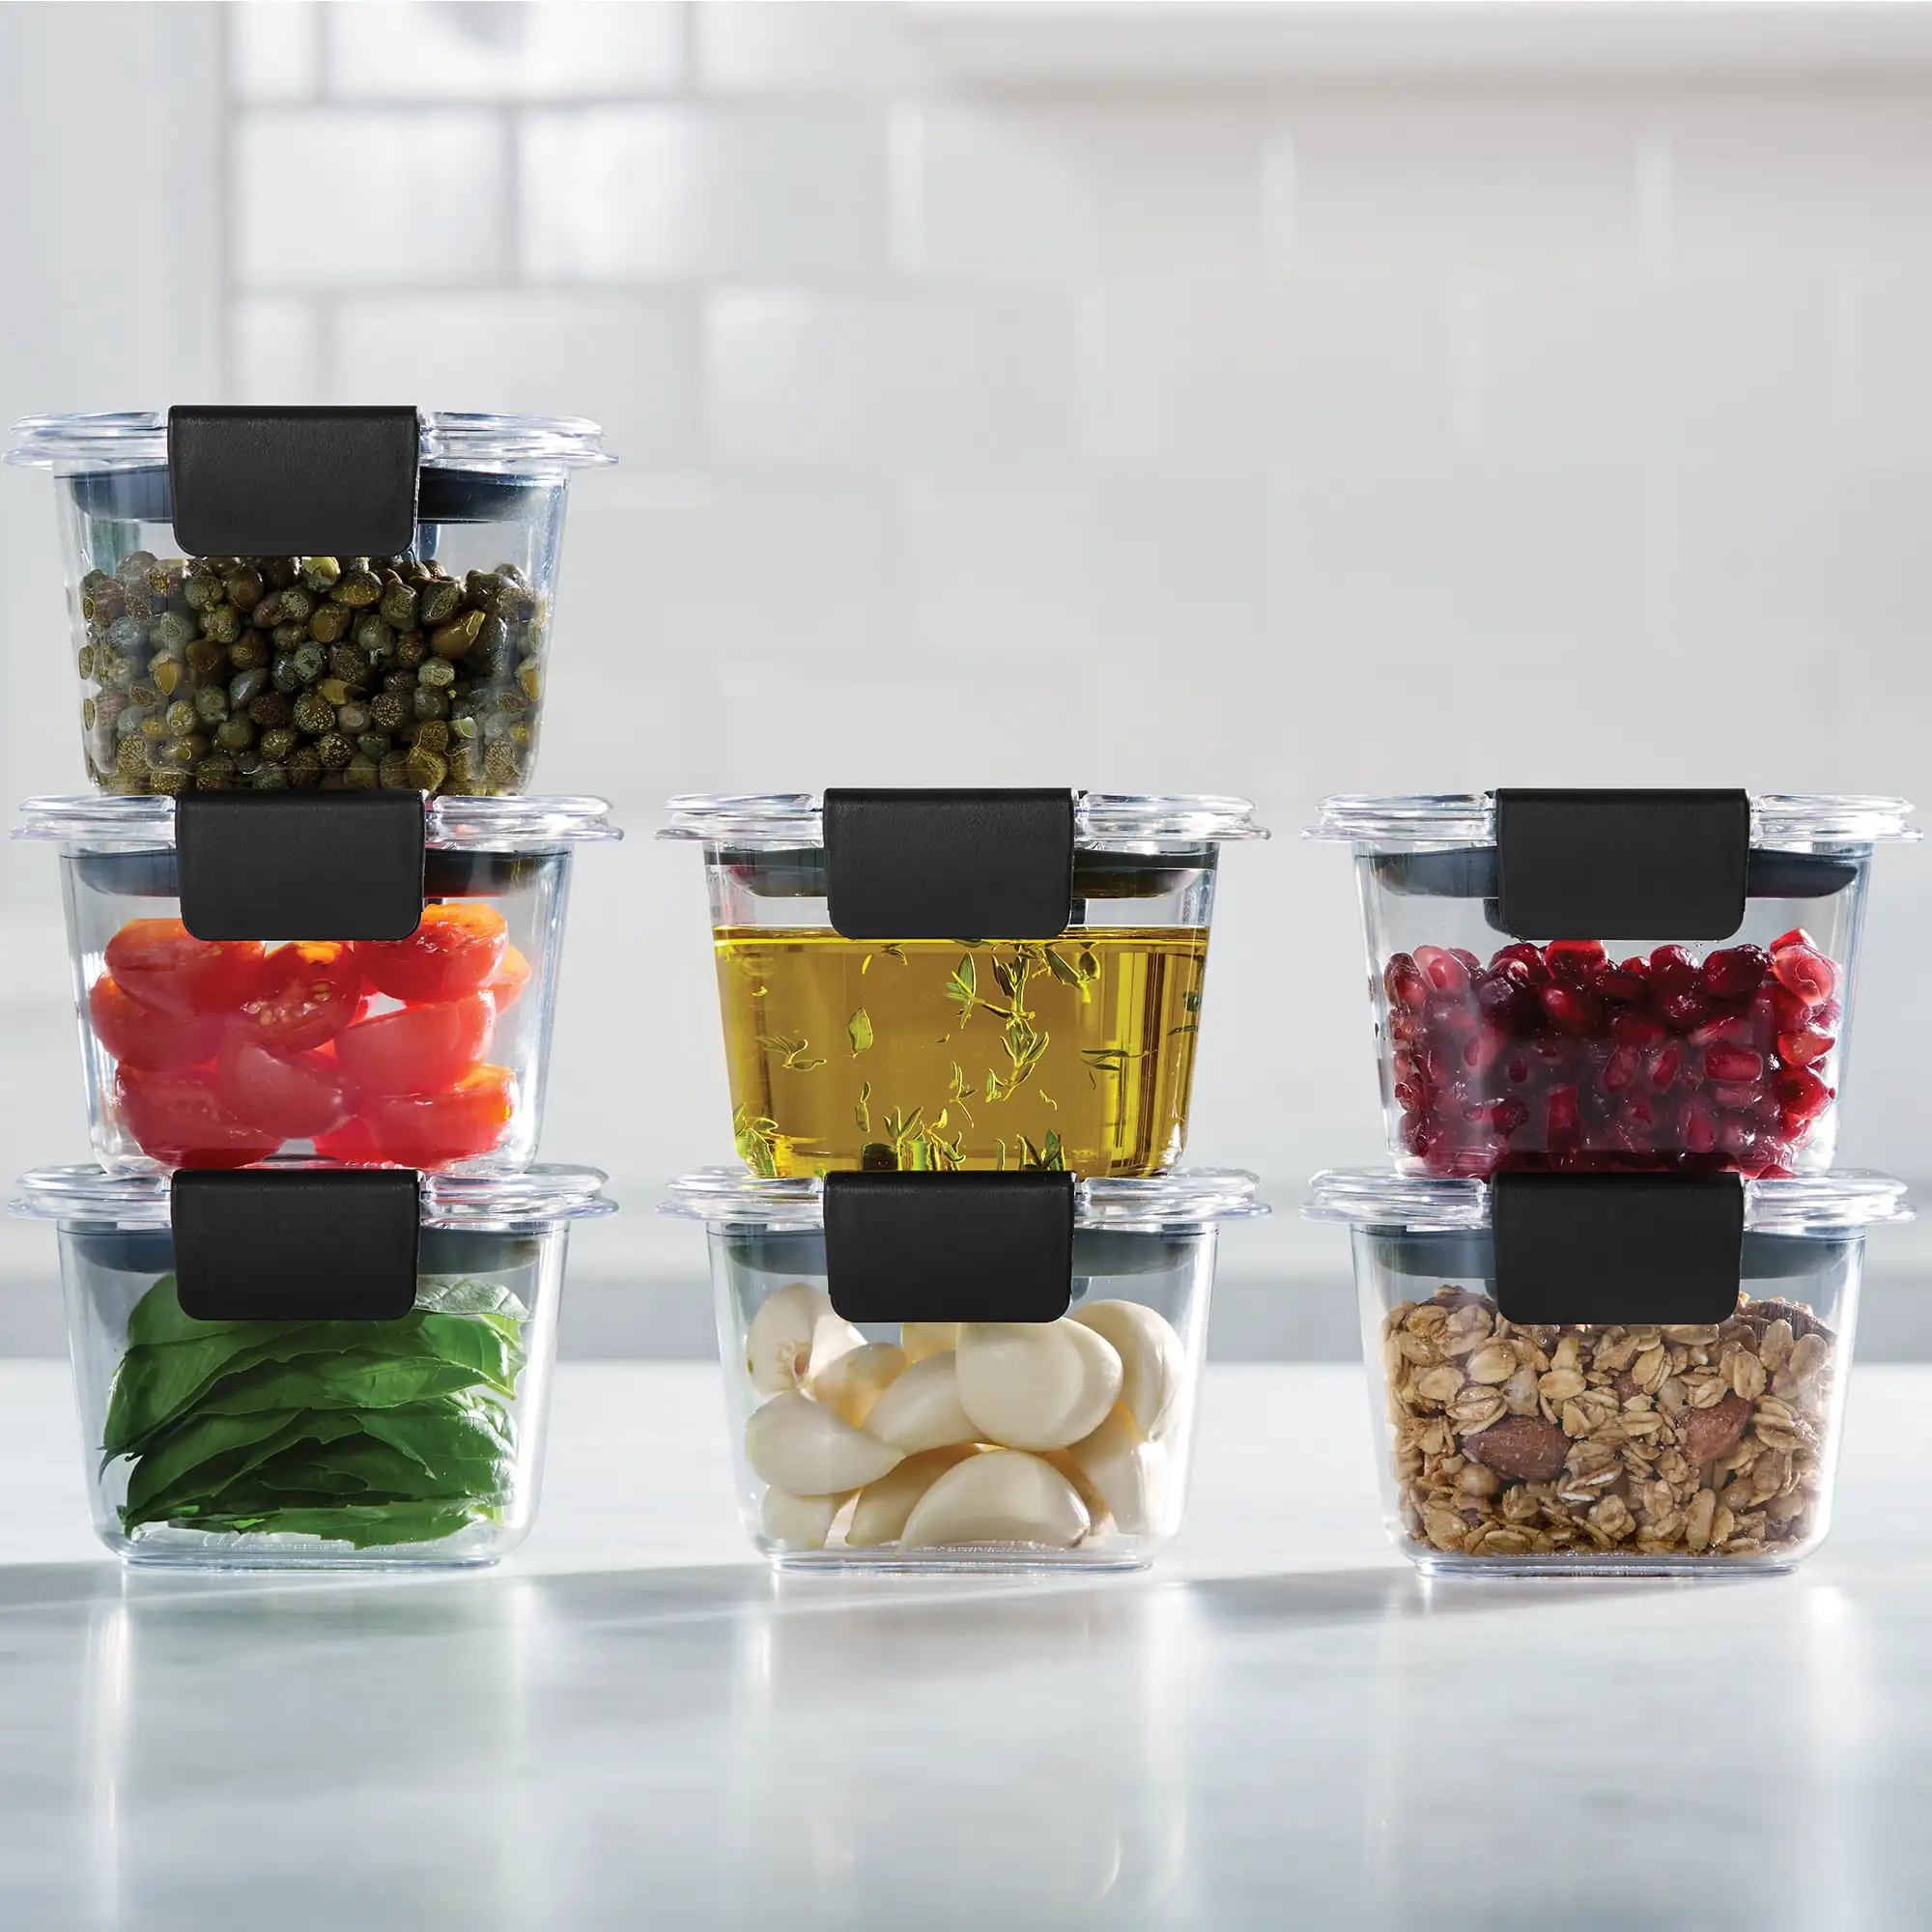 https://ae01.alicdn.com/kf/Sf558a680f4084b3d90621d4fac0f8727O/Brilliance-Food-Storage-Containers-36-Piece-Variety-Set-Clear-Tritan-Plastic.jpg